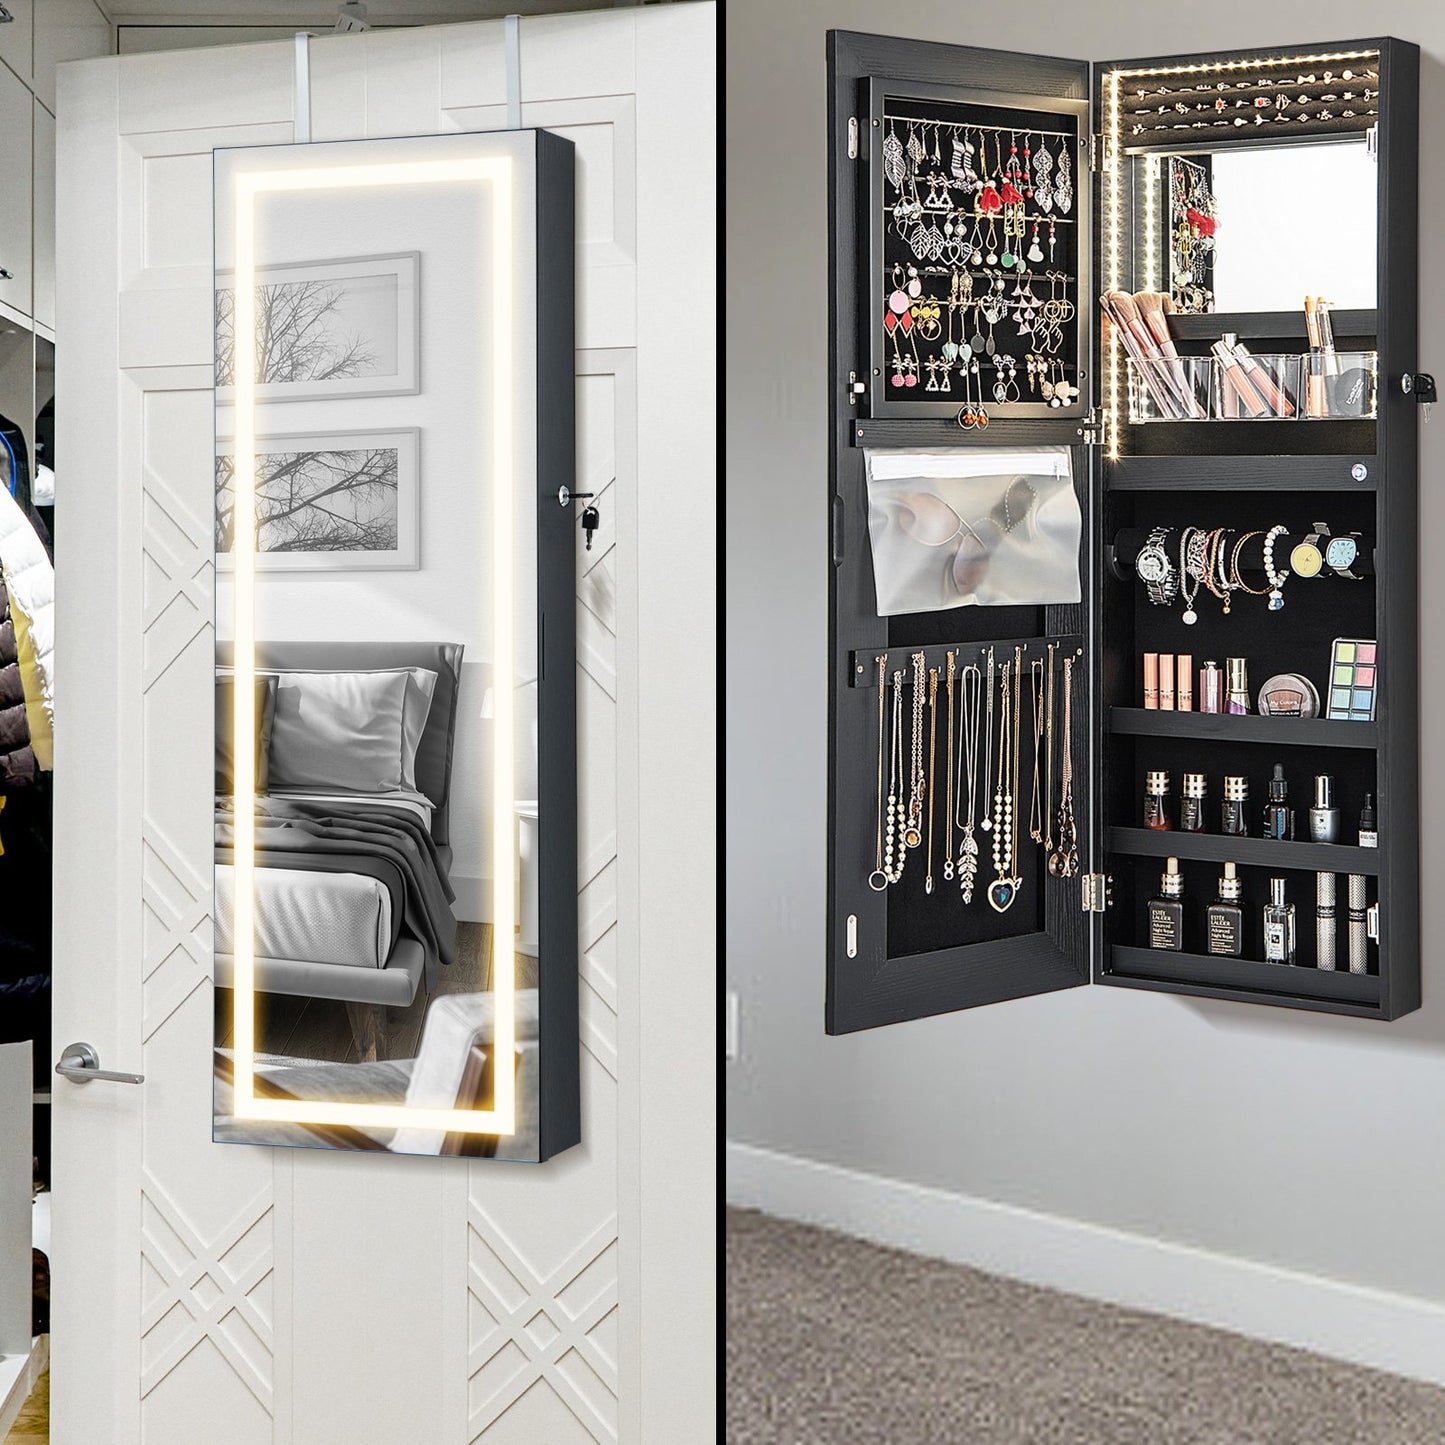 42.5 Inches Lockable Jewelry Mirror Wall Cabinet with 3-Color LED Lights, Black at Gallery Canada